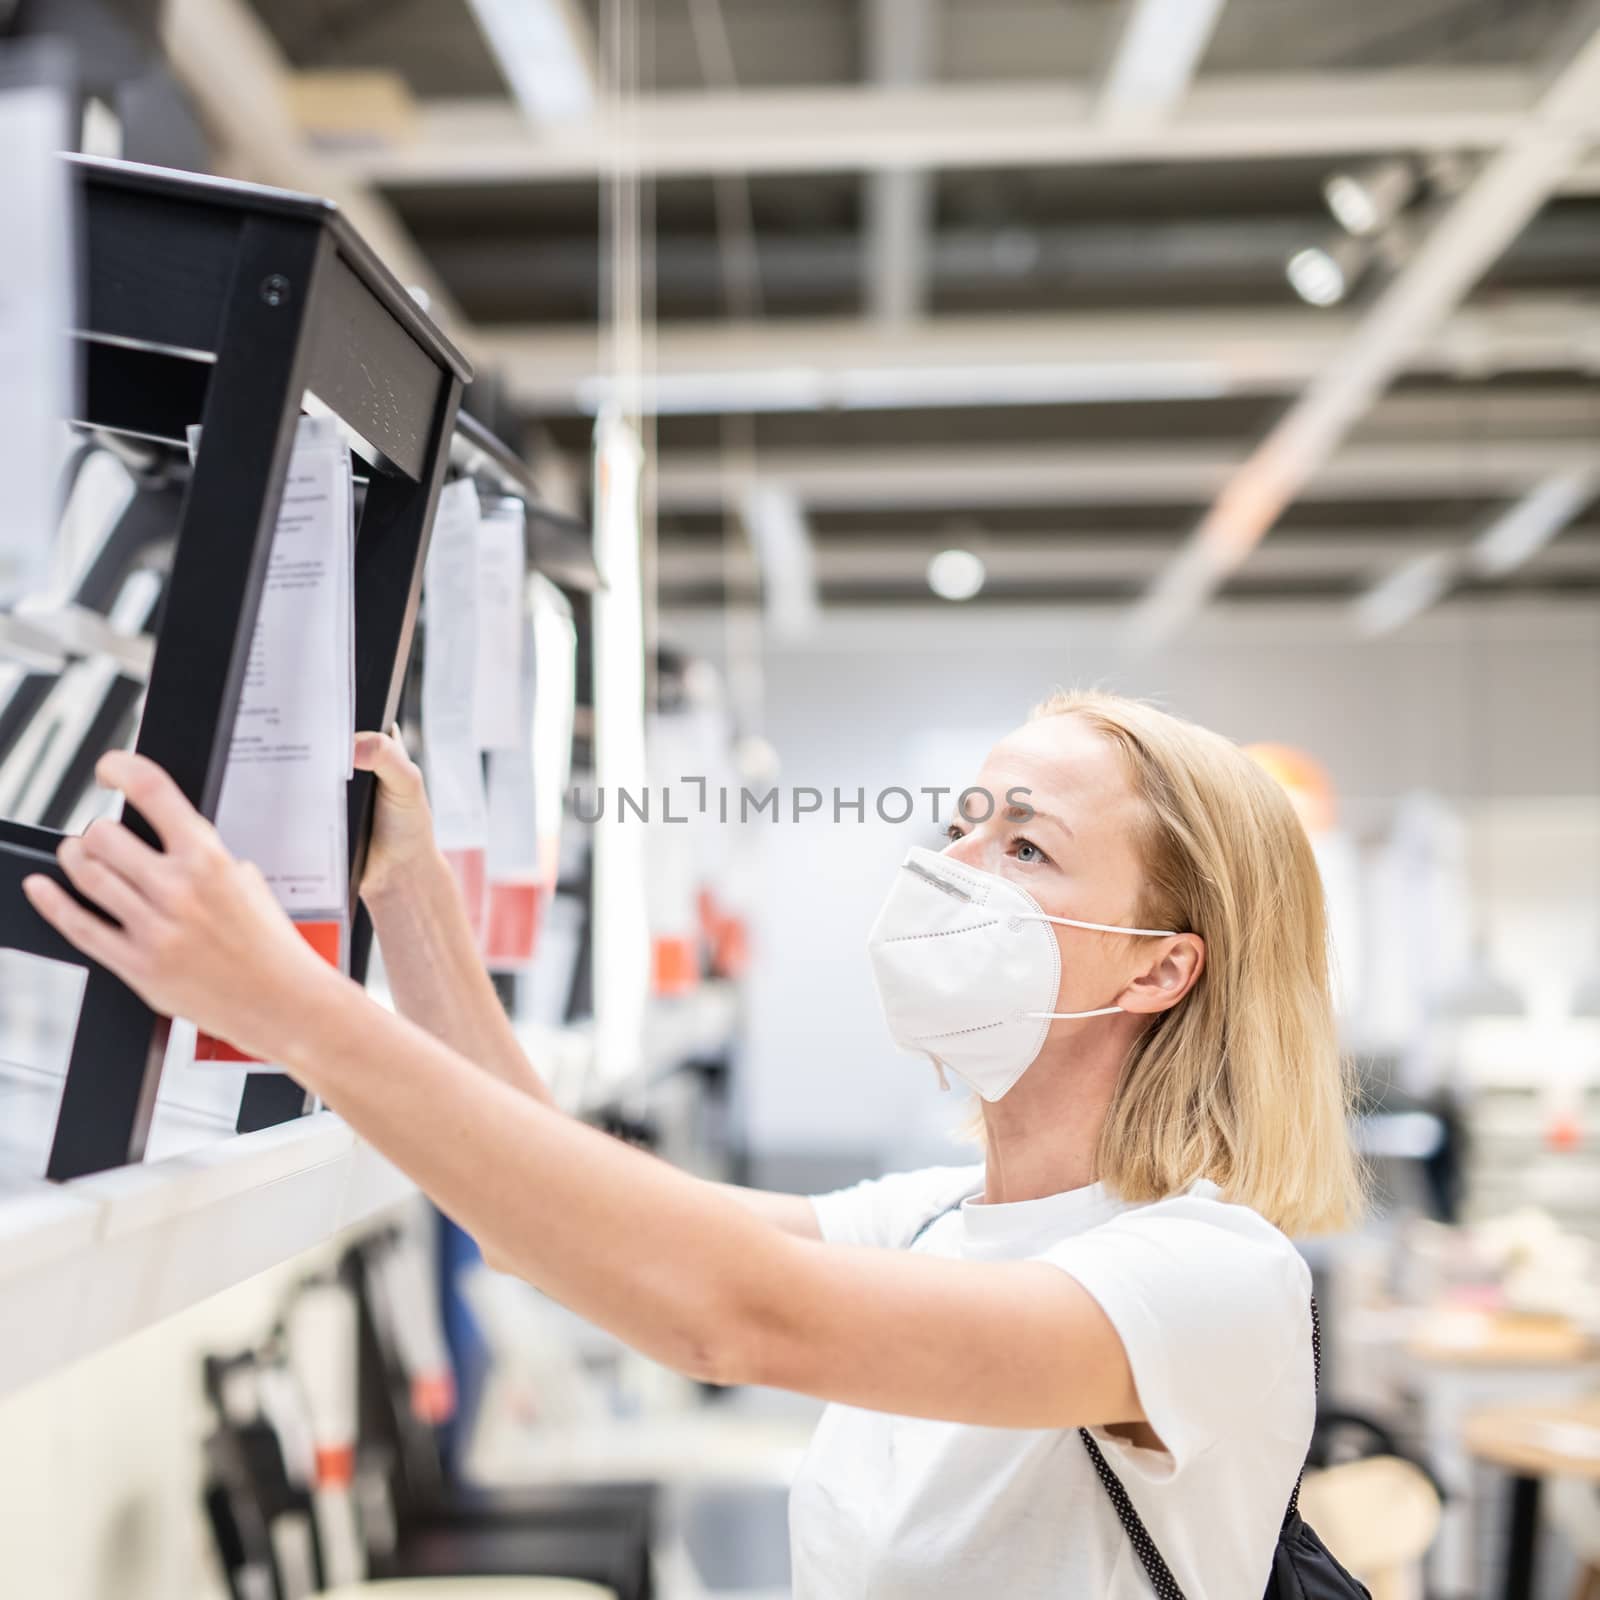 New normal during covid epidemic. Caucasian woman shopping at retail furniture and home accessories store wearing protective medical face mask to prevent spreading of corona virus.